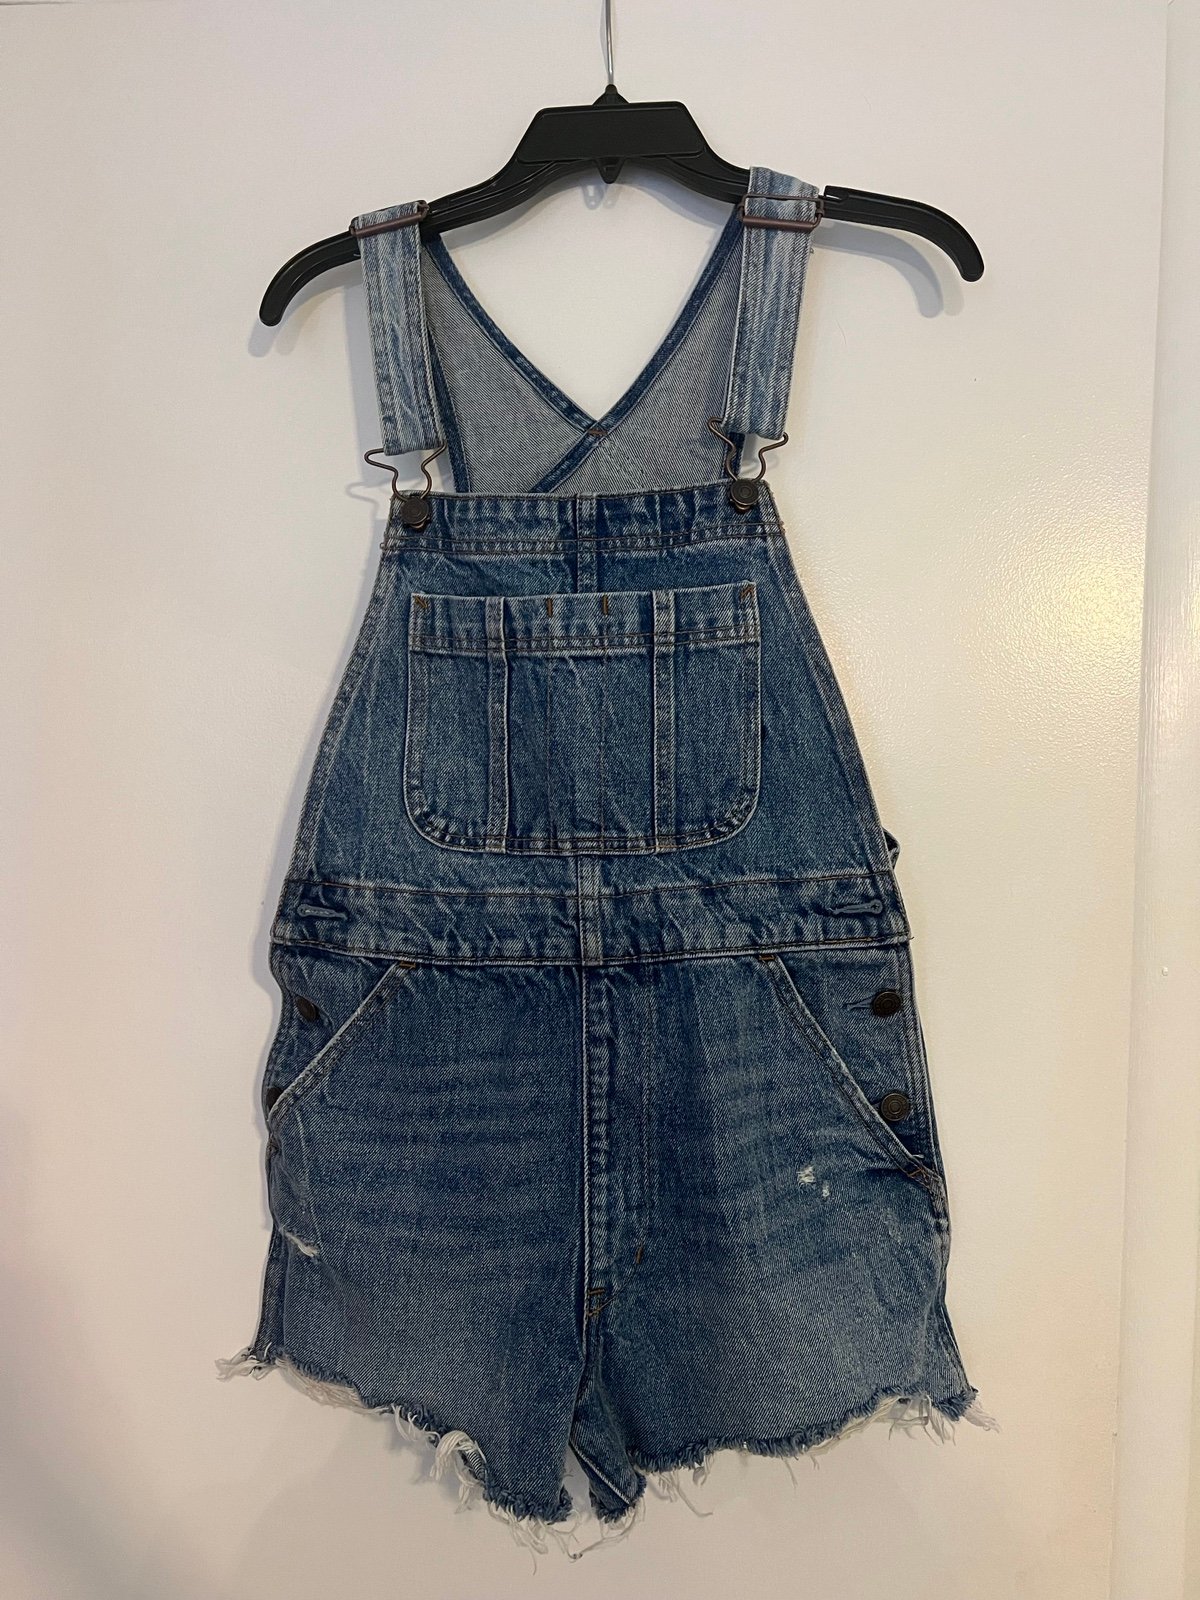 large selection womens denim overalls juj3mM7qq Great